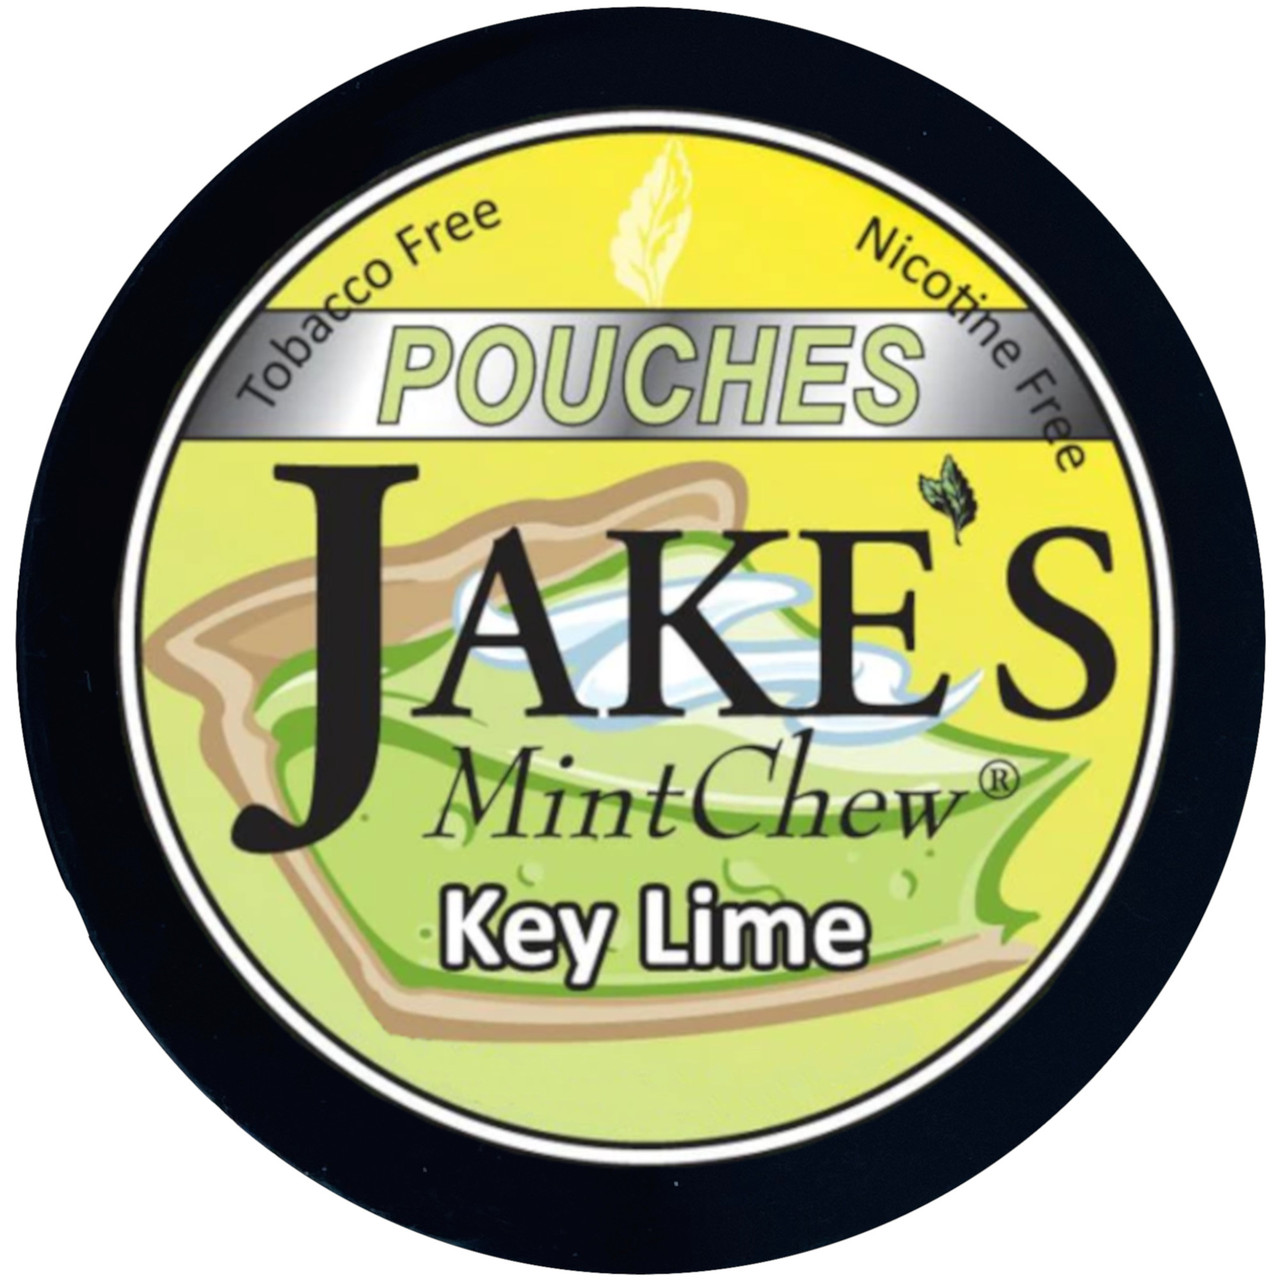 Jake's Mint Chew Pouches Key Lime 1 Can